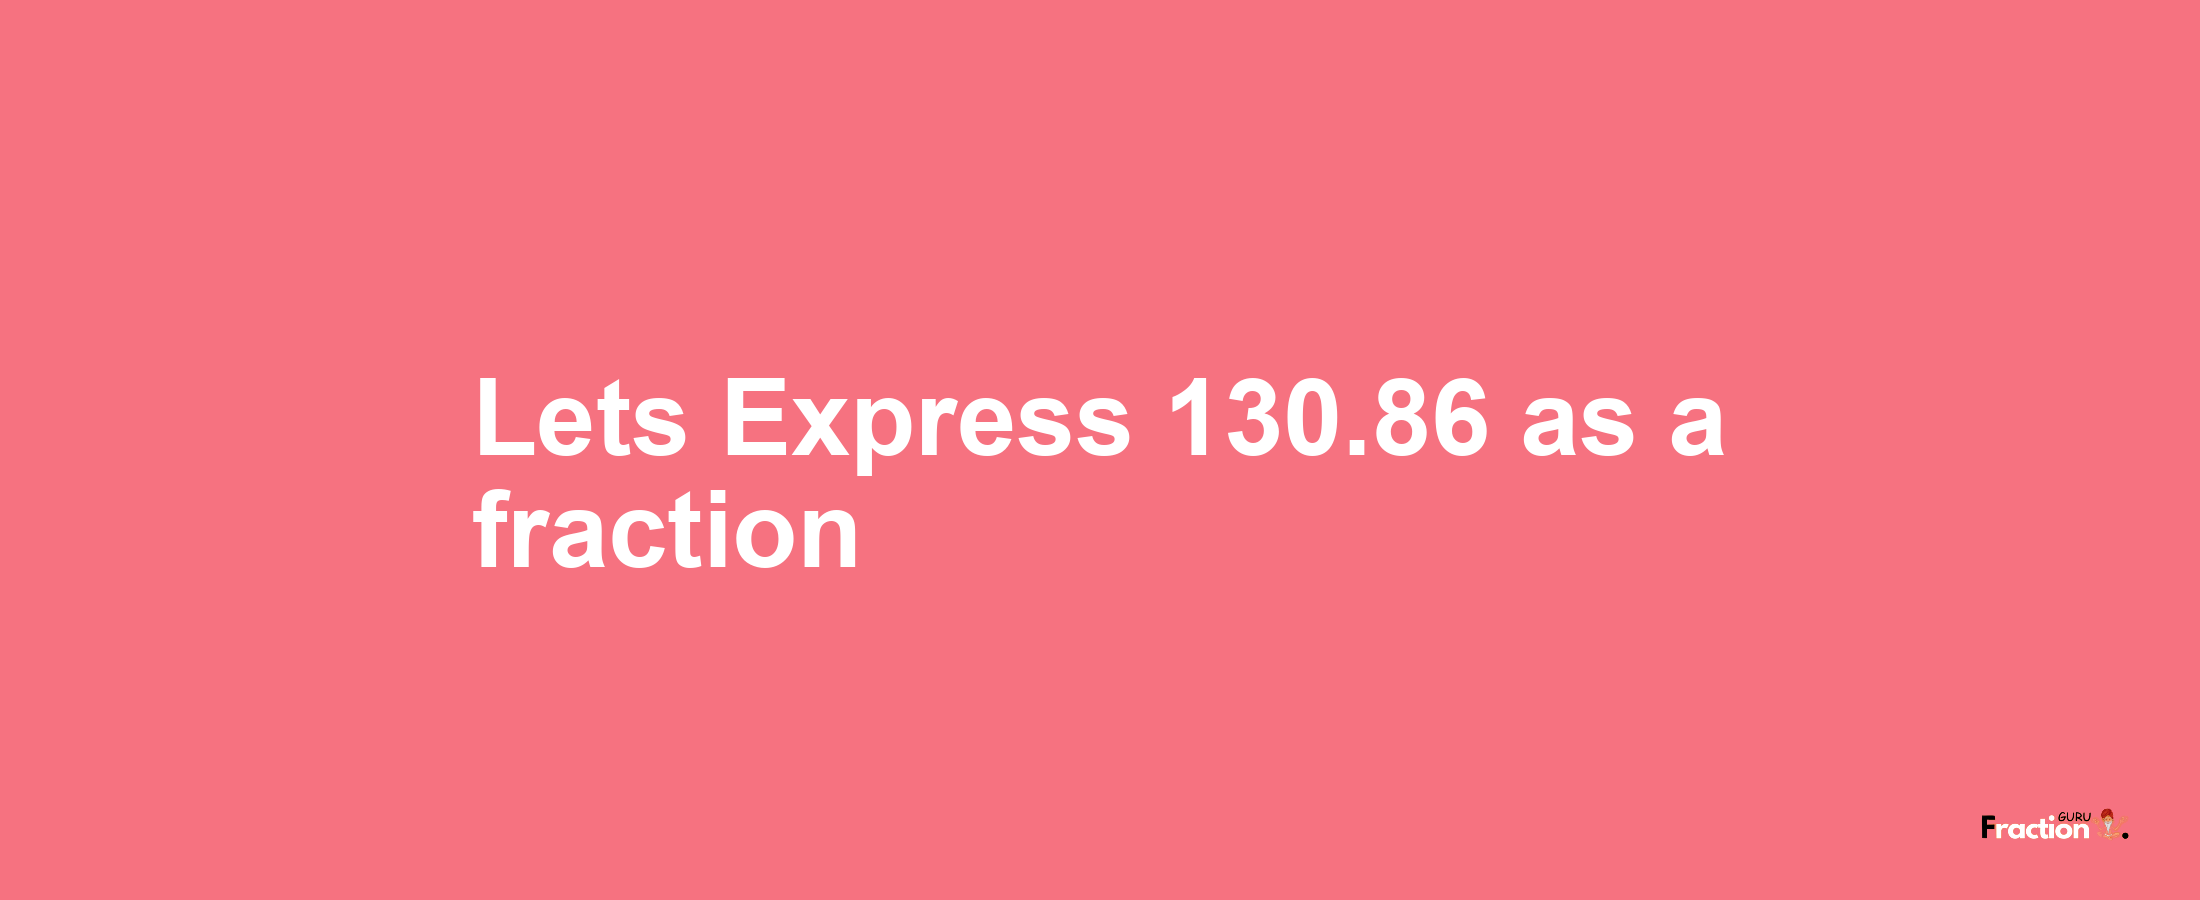 Lets Express 130.86 as afraction